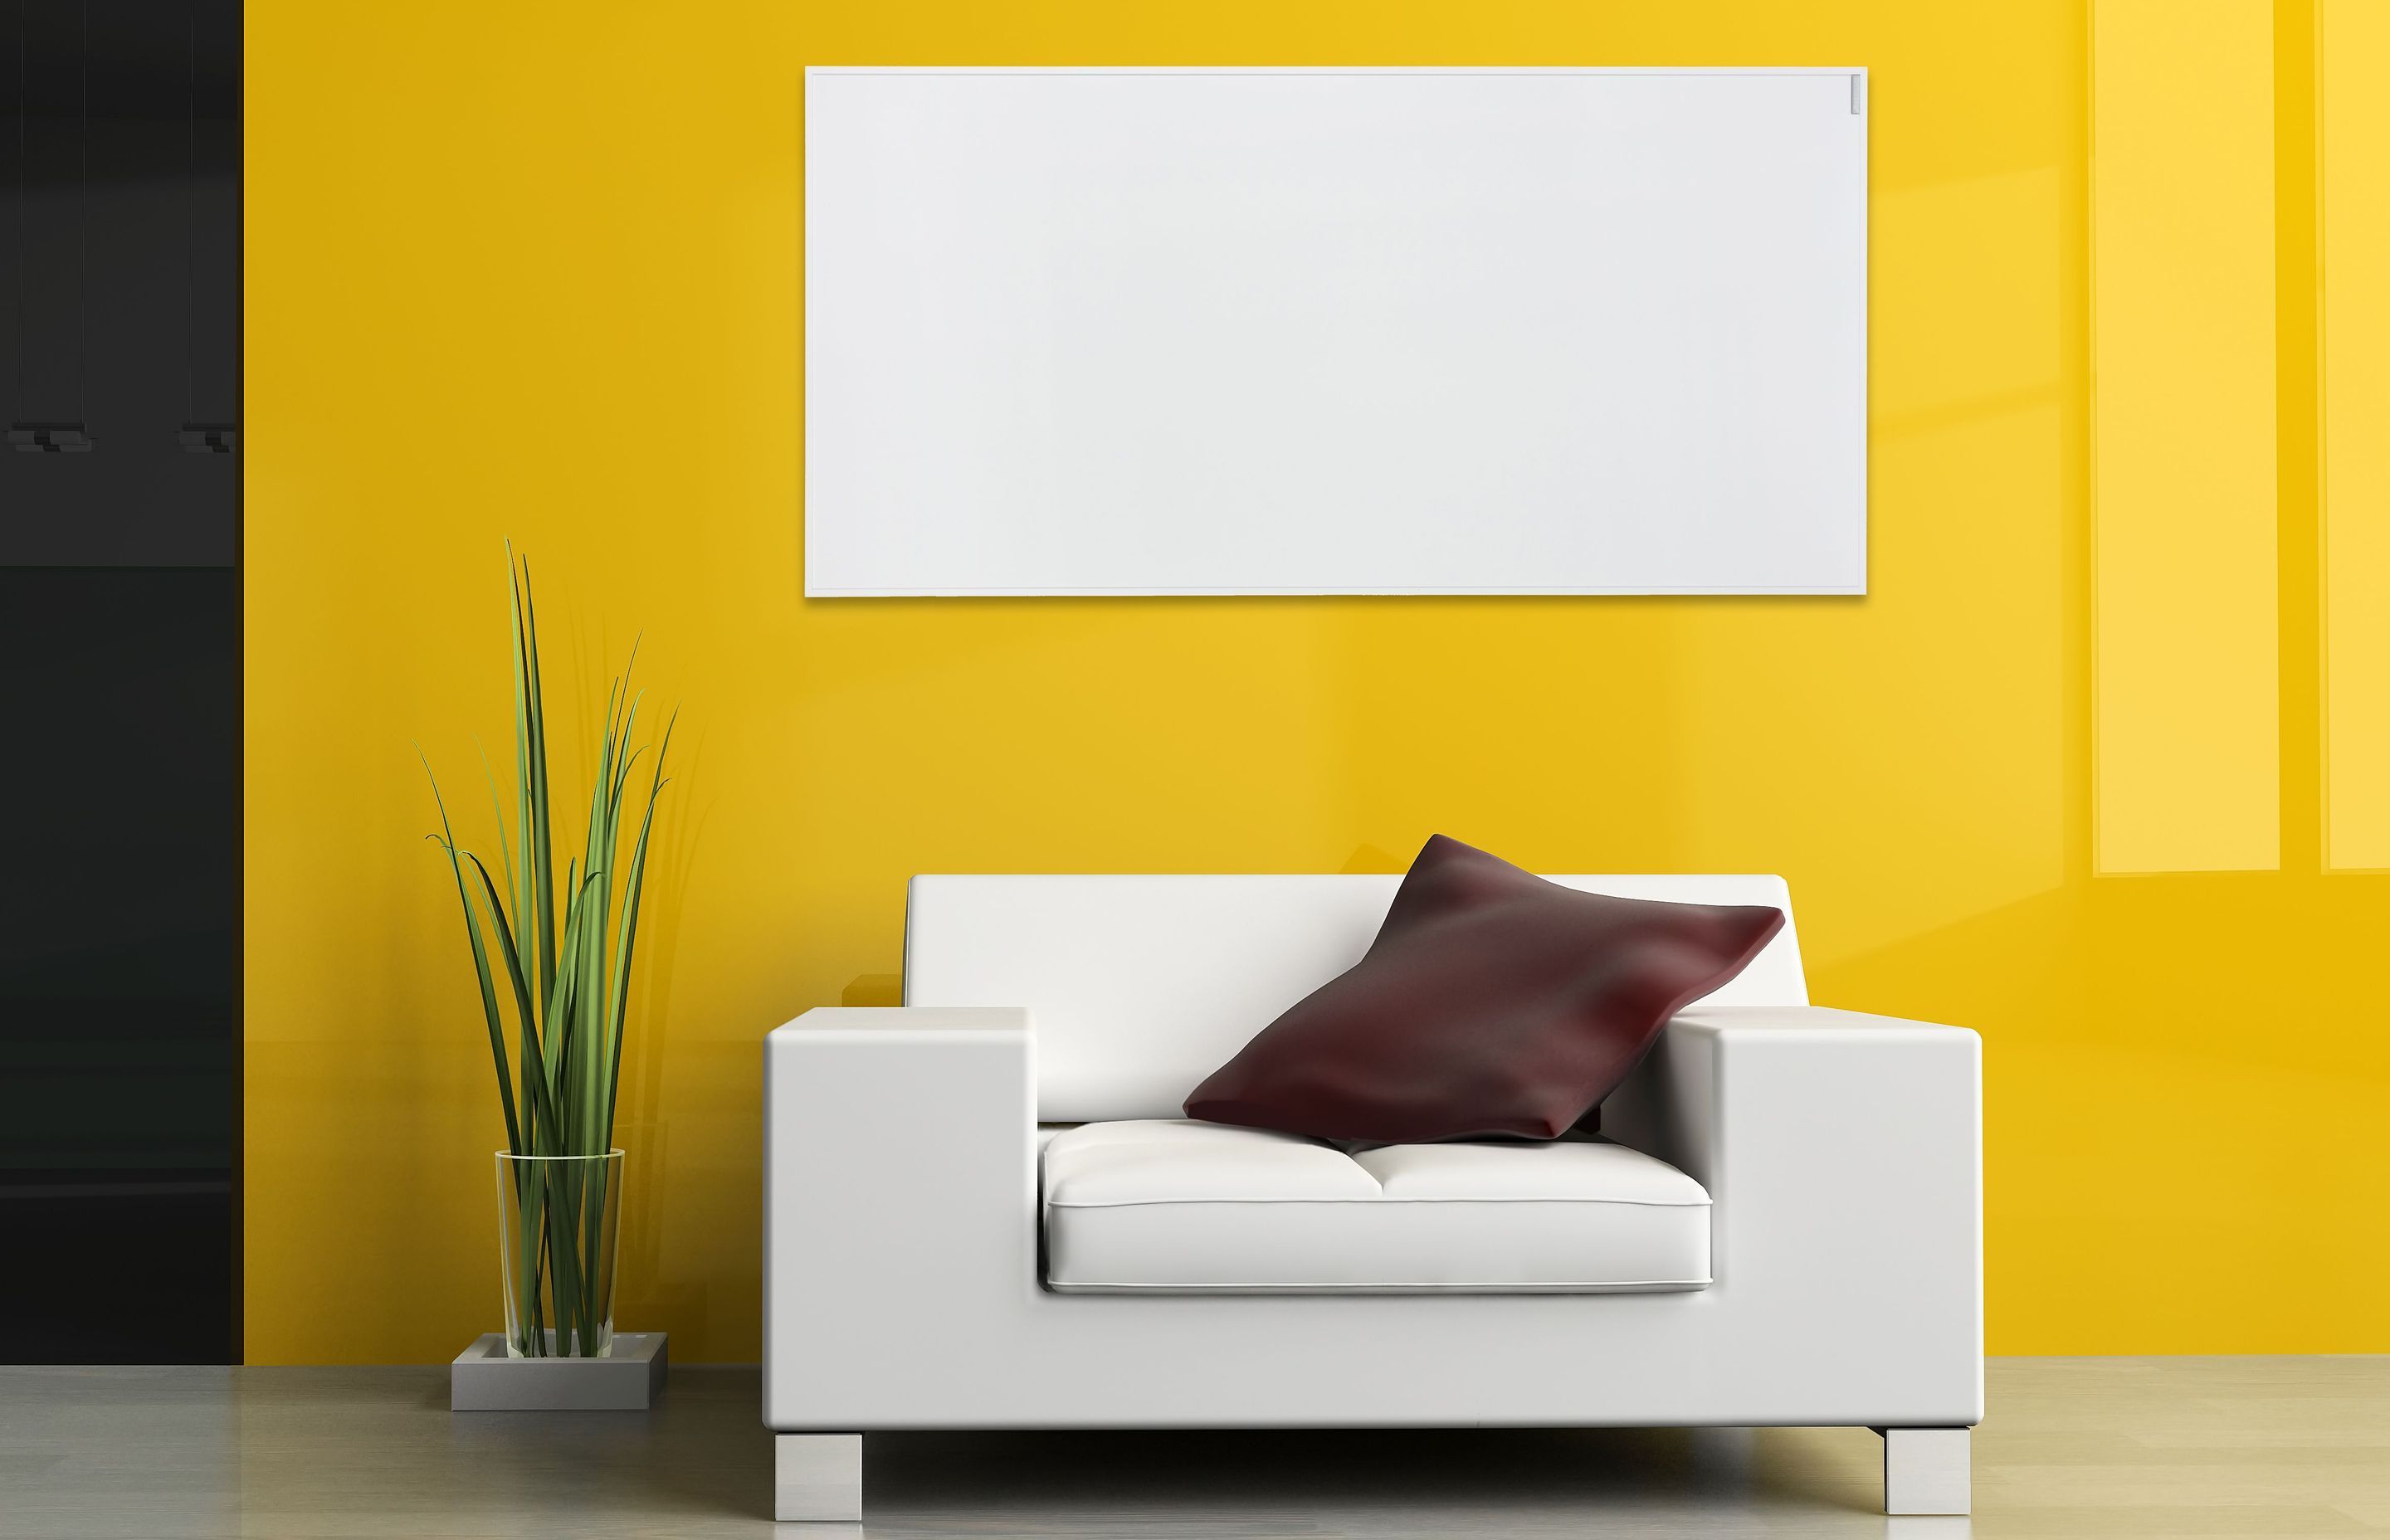 Herschel Infrared has a range of residential heating panel solutions including white, mirror, glass and picture.